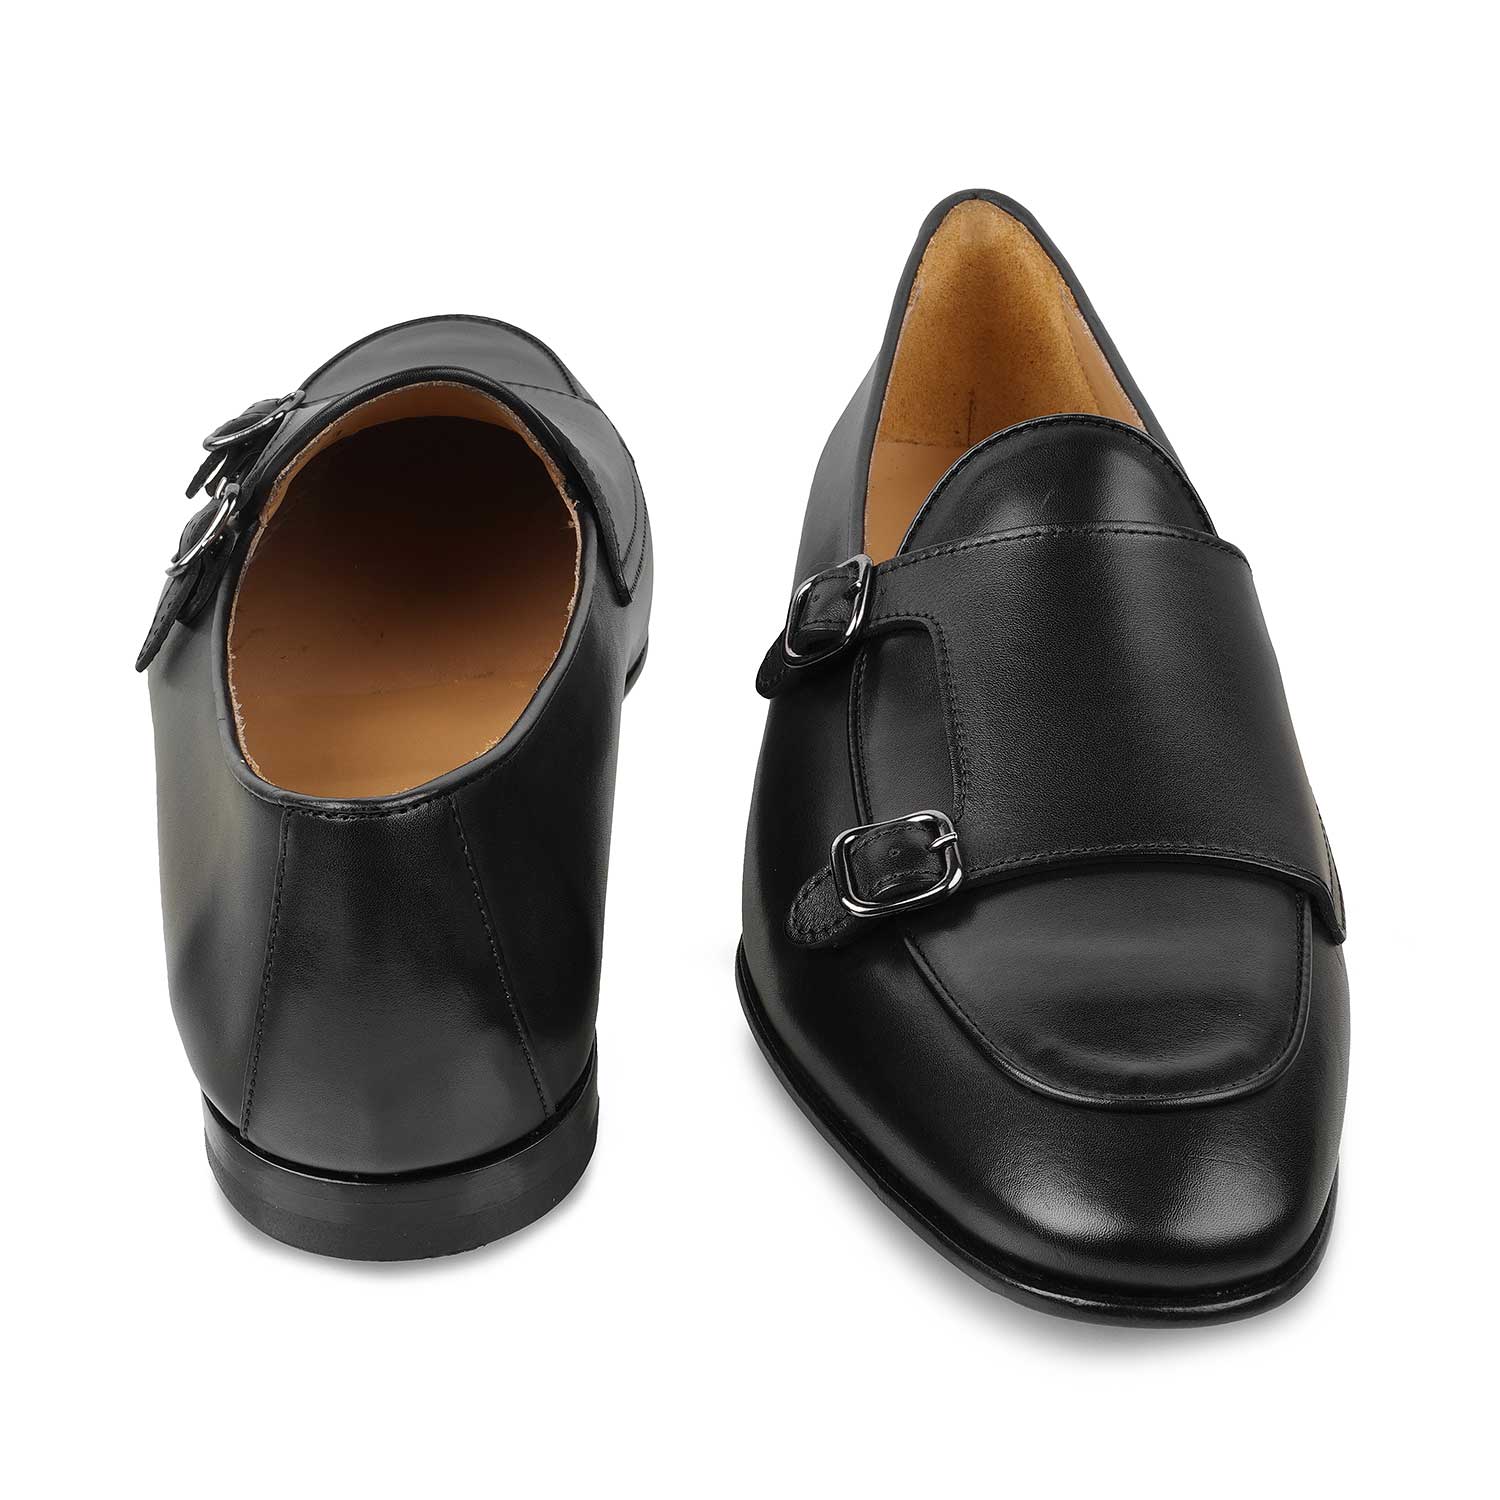 The Maccabeo Black Men's Handcrafted Double Monk Shoes Tresmode